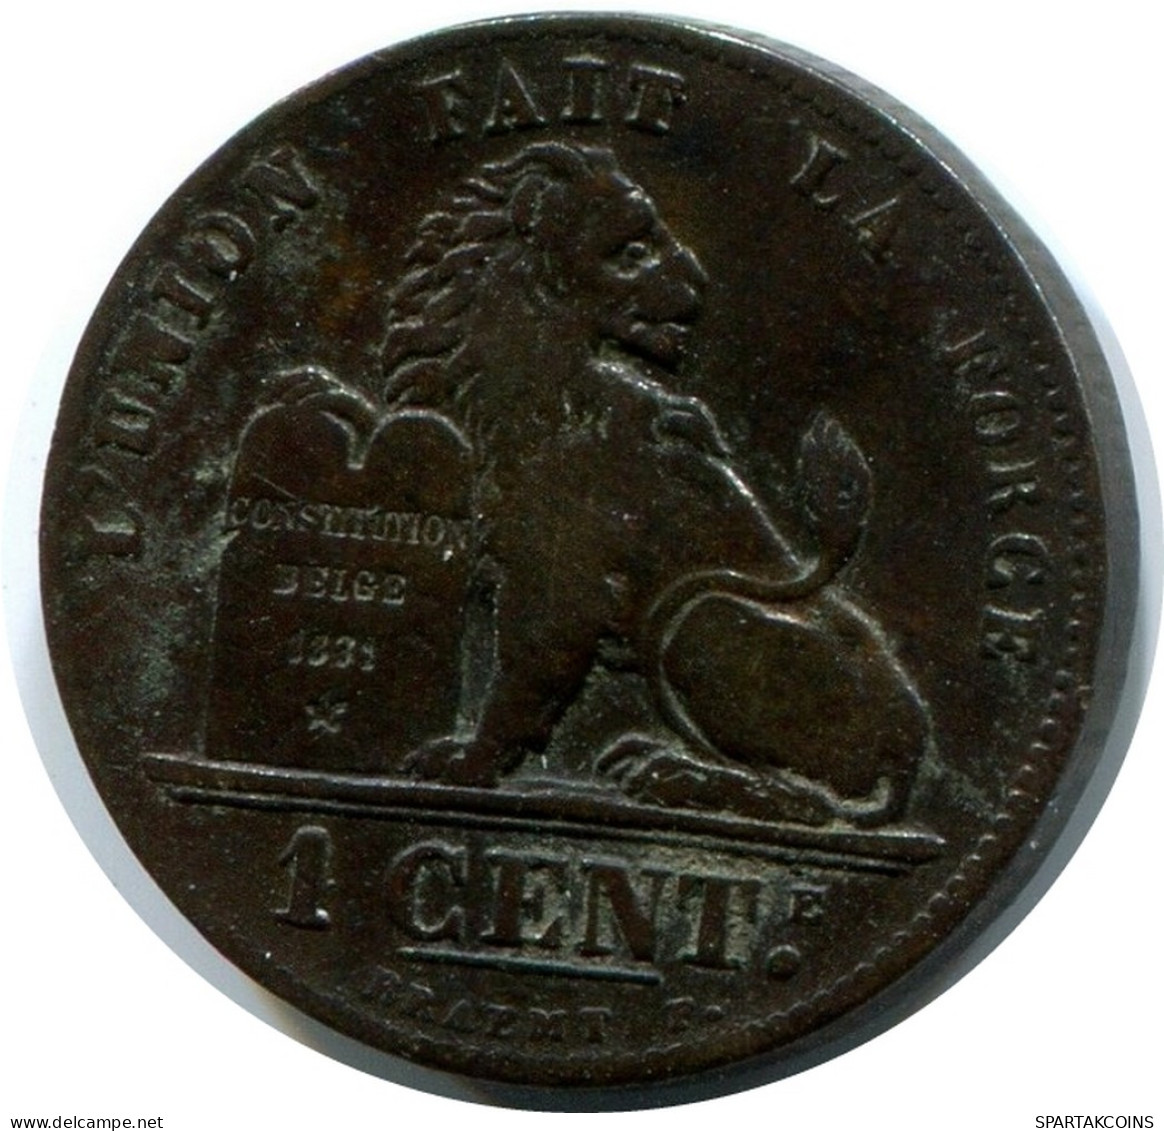 1 CENTIME 1899 BELGIUM Coin FRENCH Text #AX354.U - 1 Centime